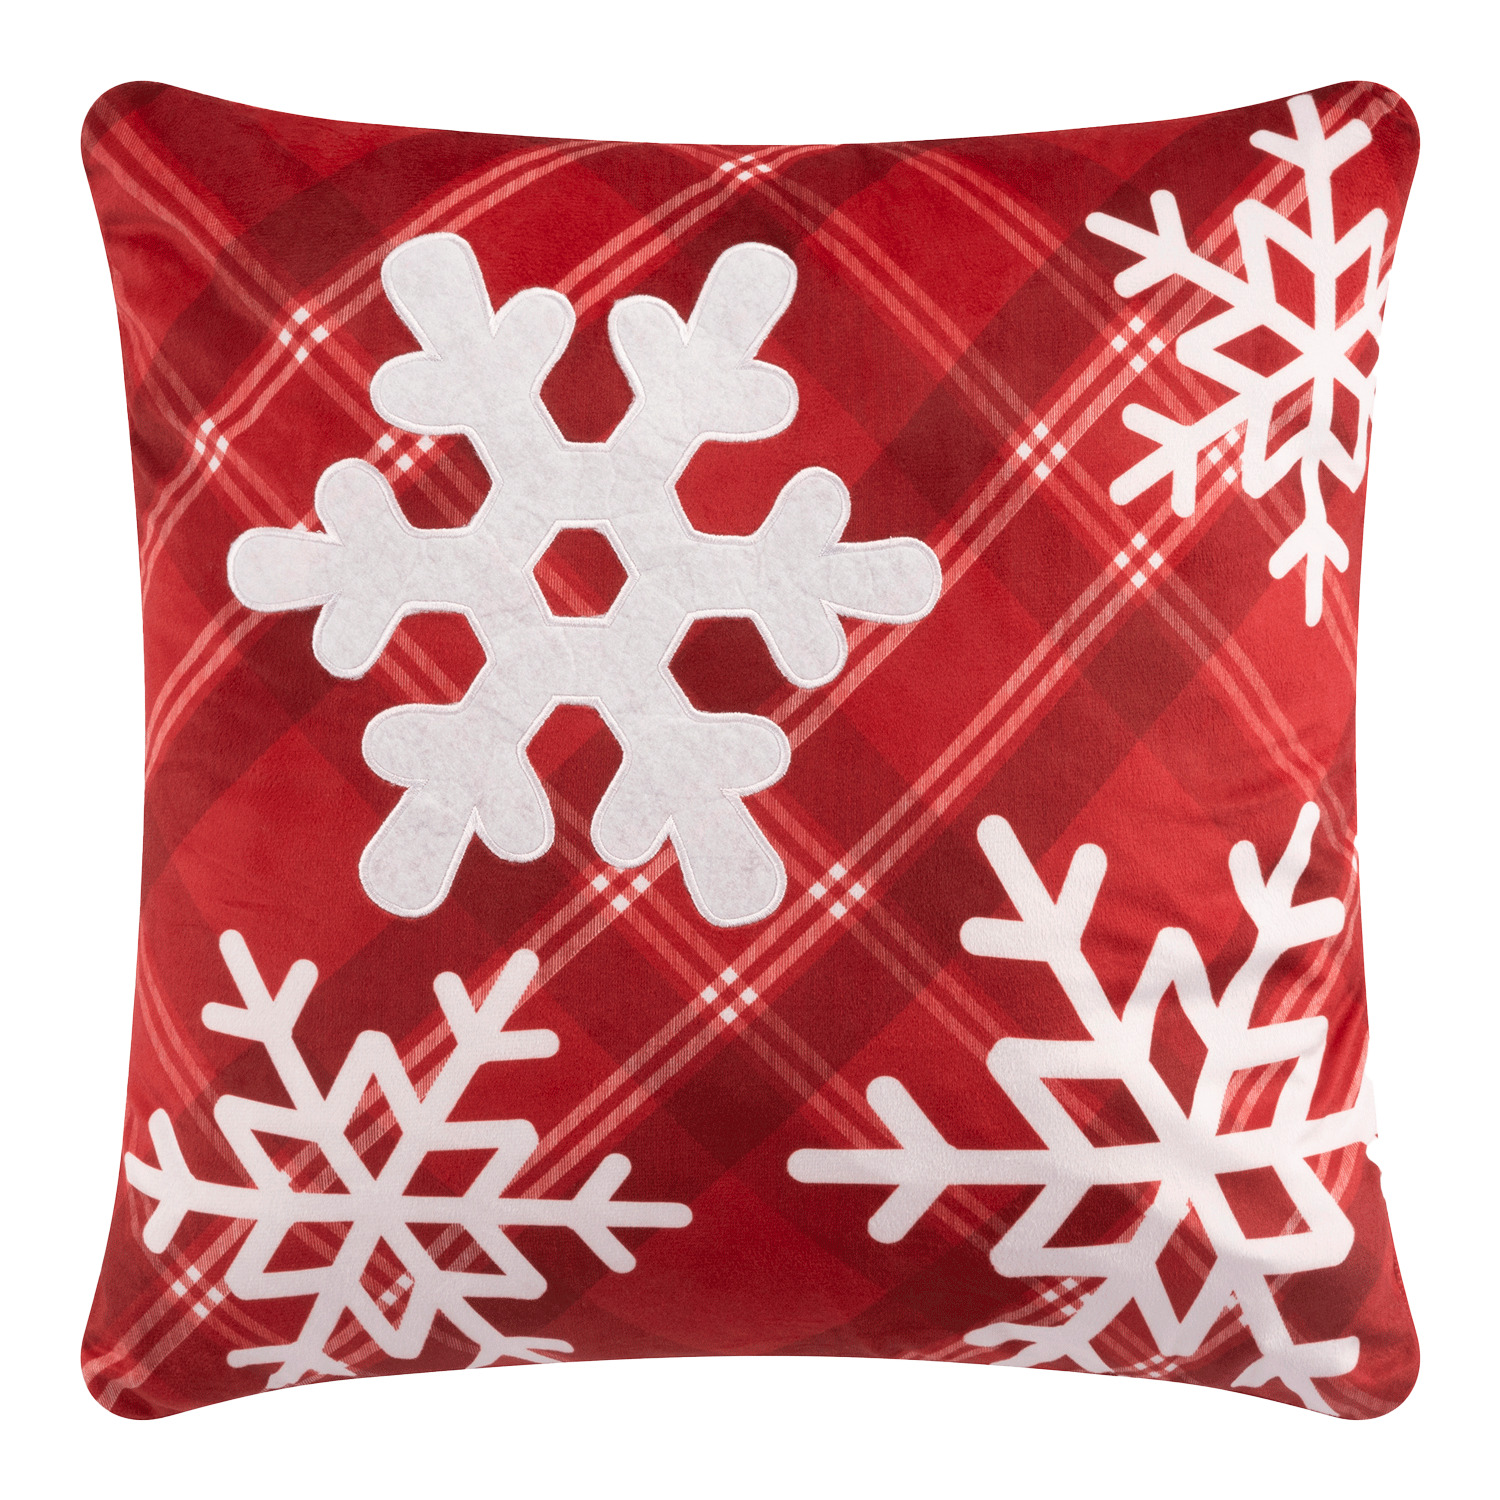 Printed cushion with 3D elements, 17"x17" - Snowflakes